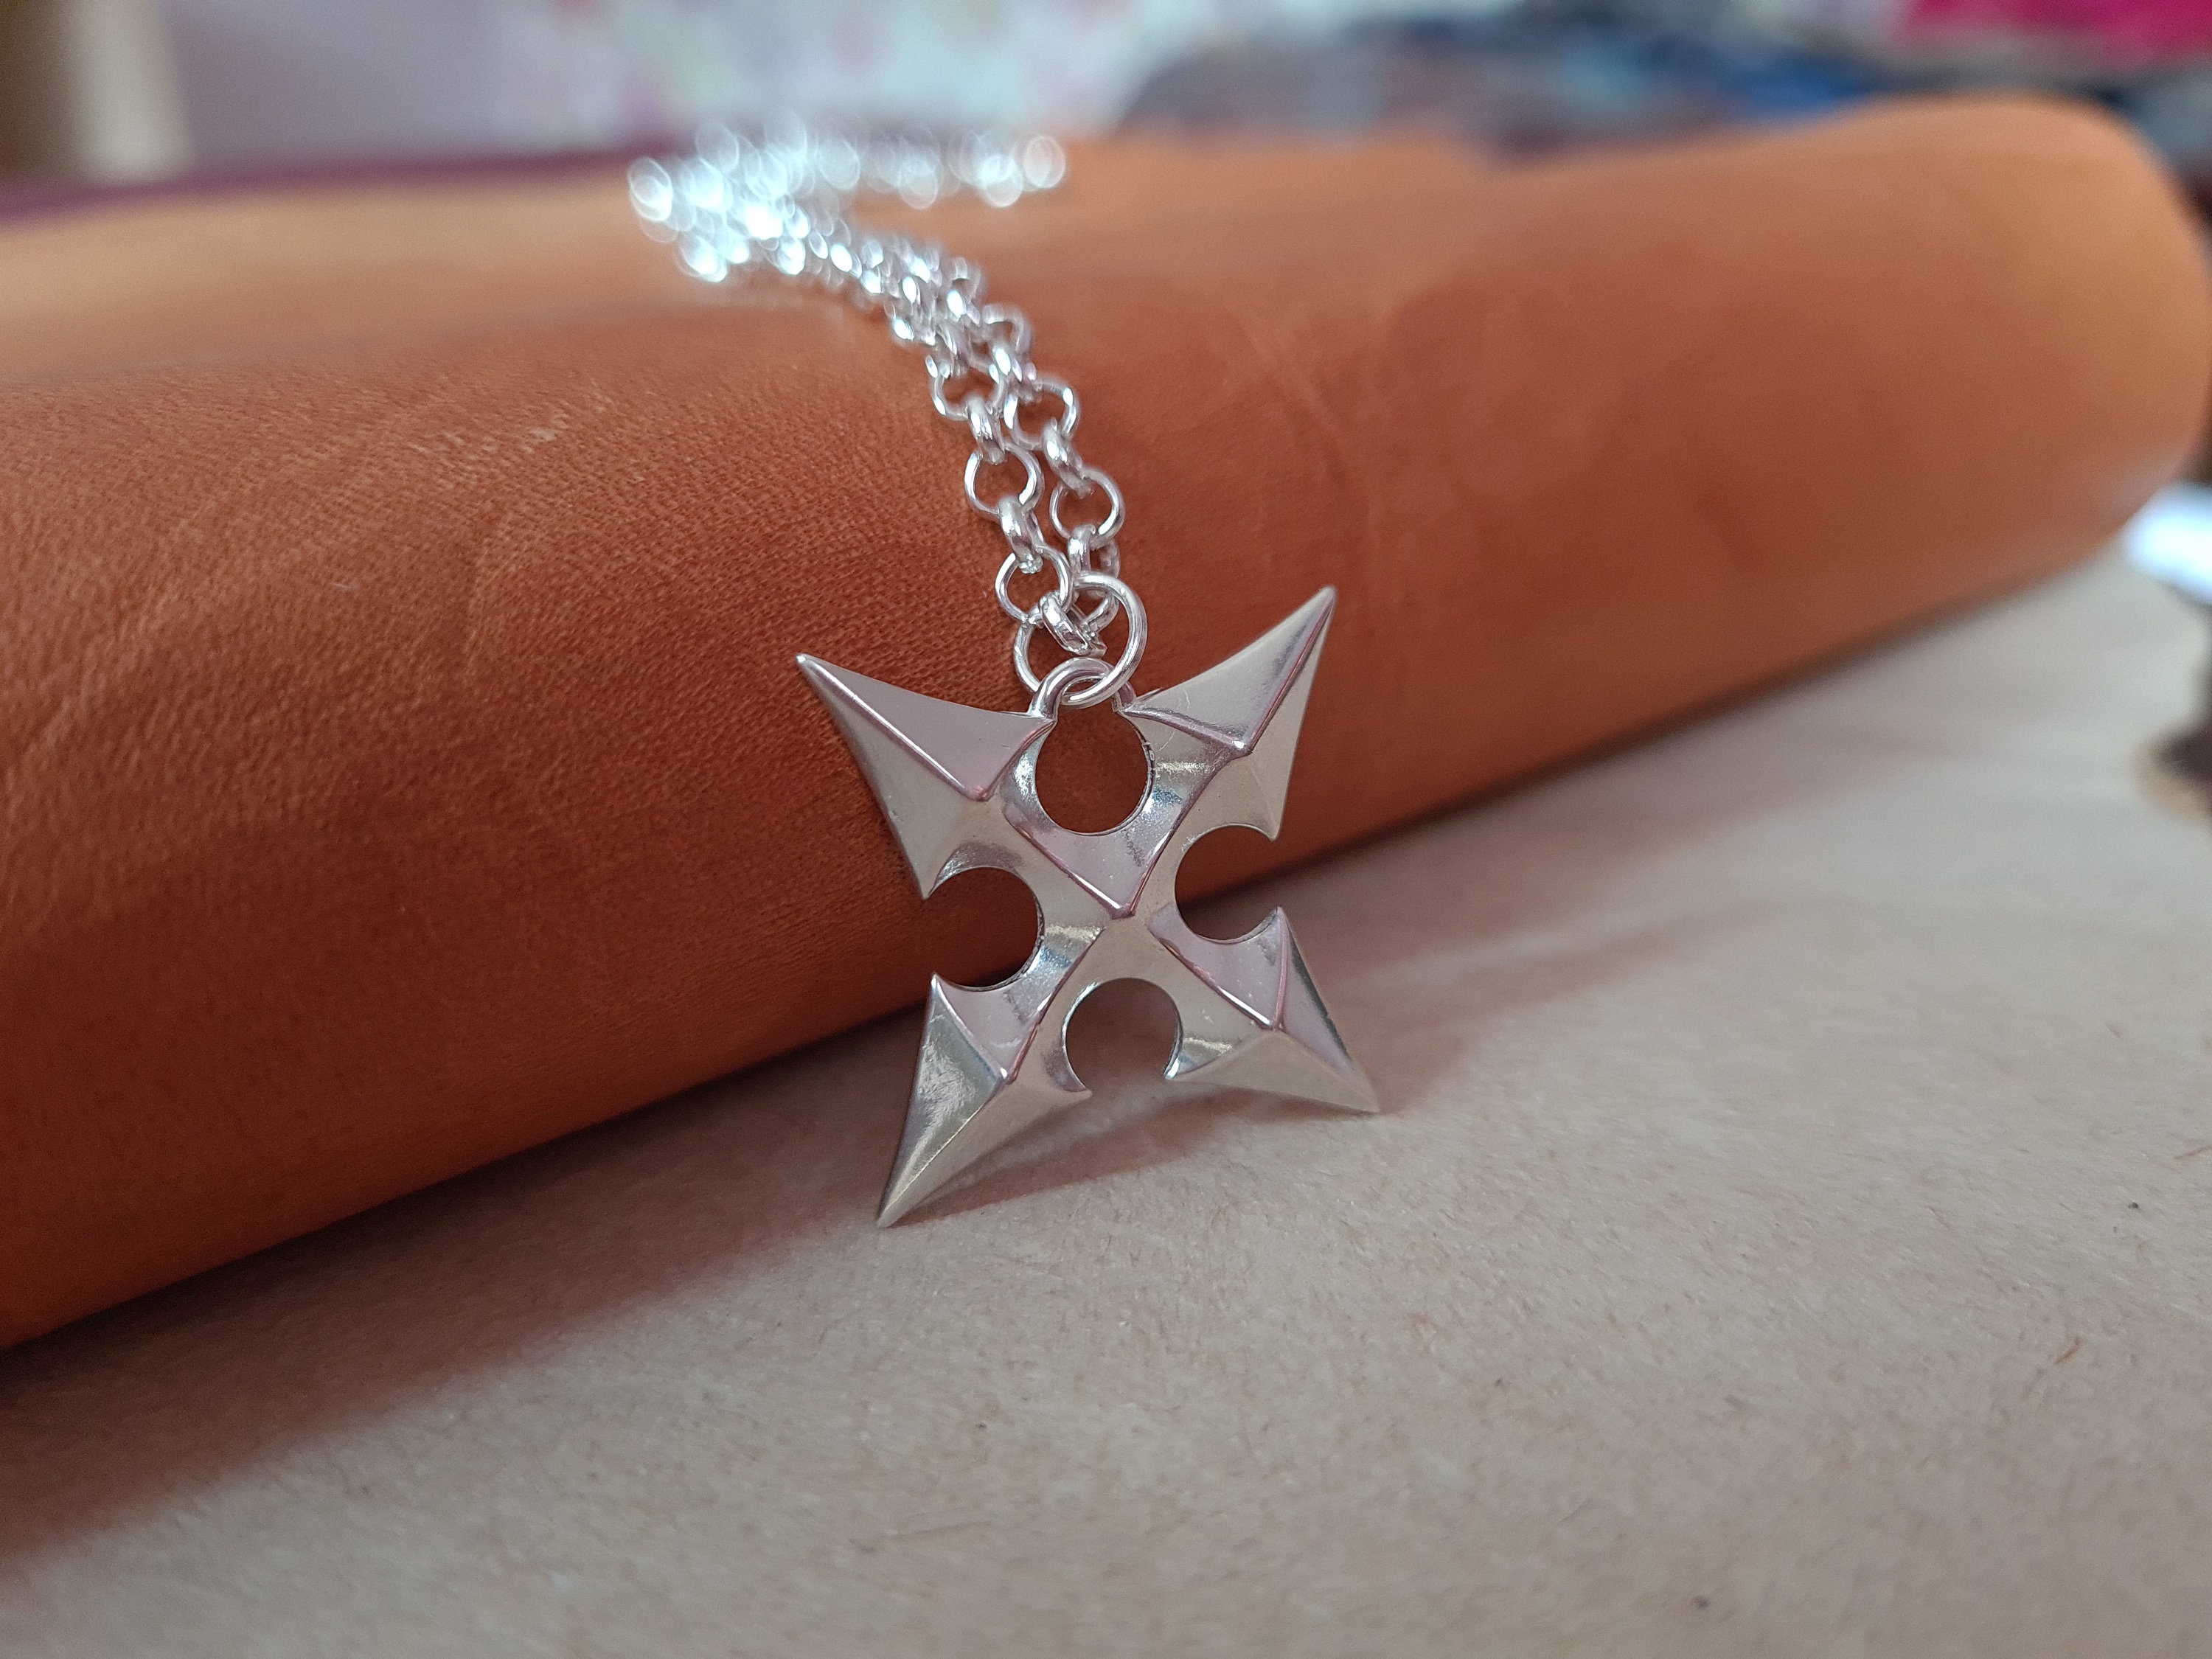 Xcoser Anime Kingdom Hearts Necklace Series Sets 2 Jewelry Silver